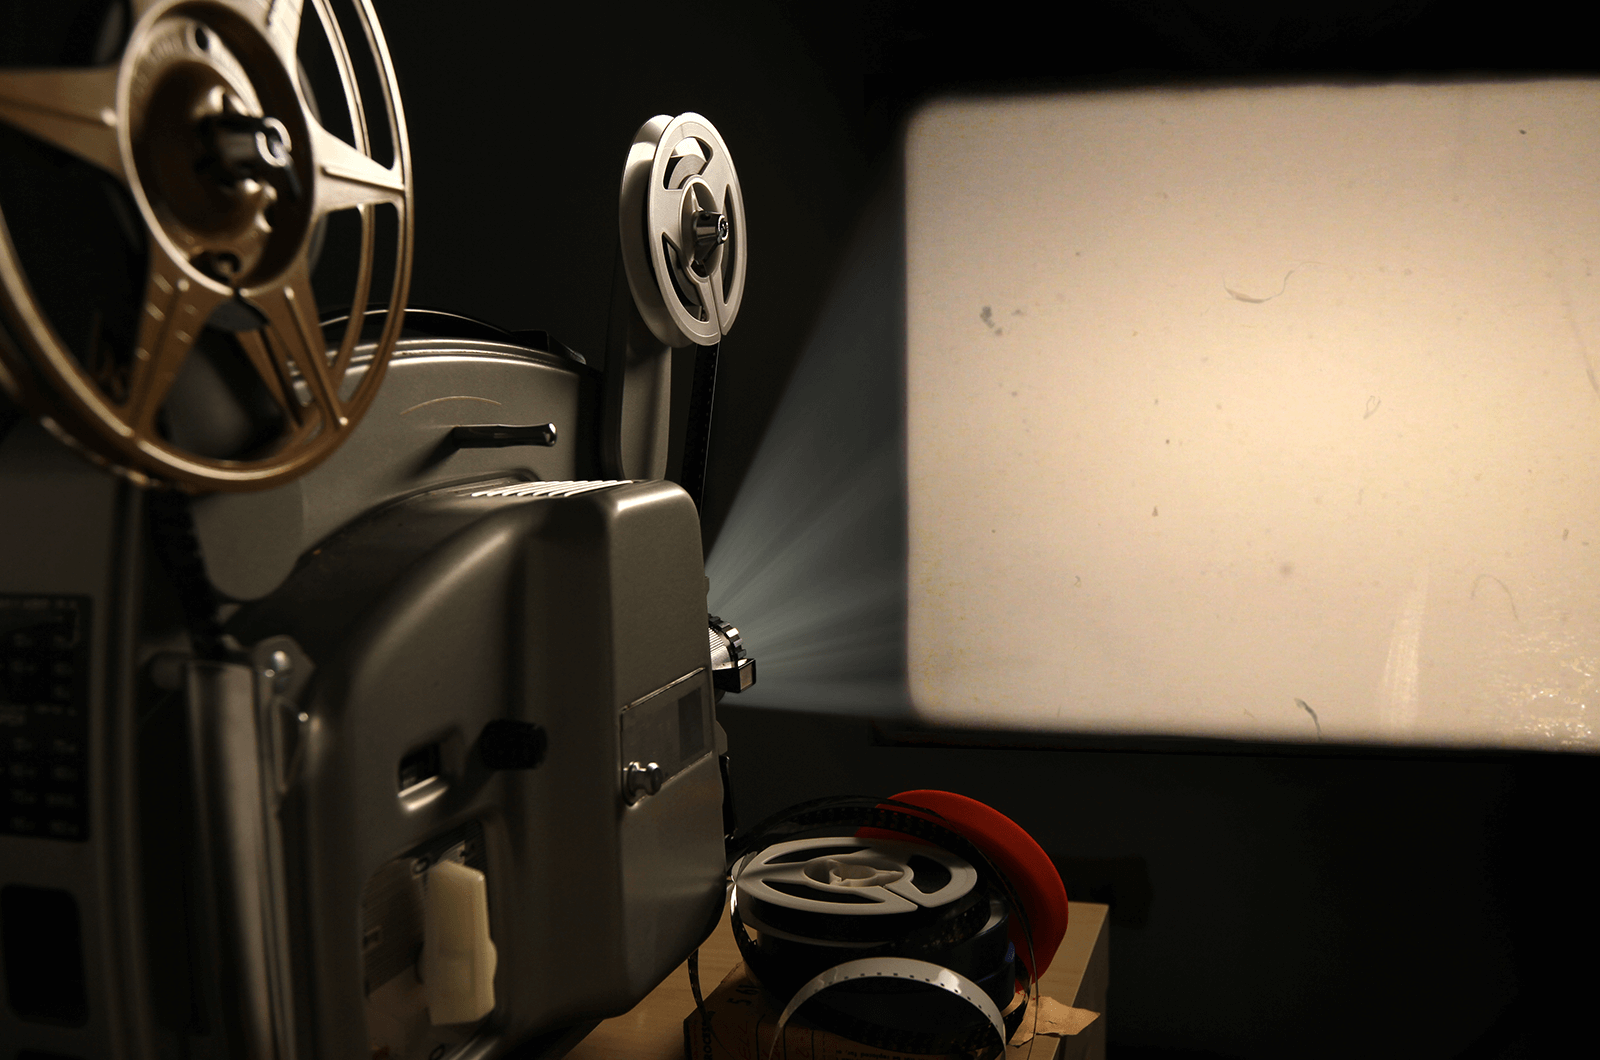 Movie reel showing light on a screen